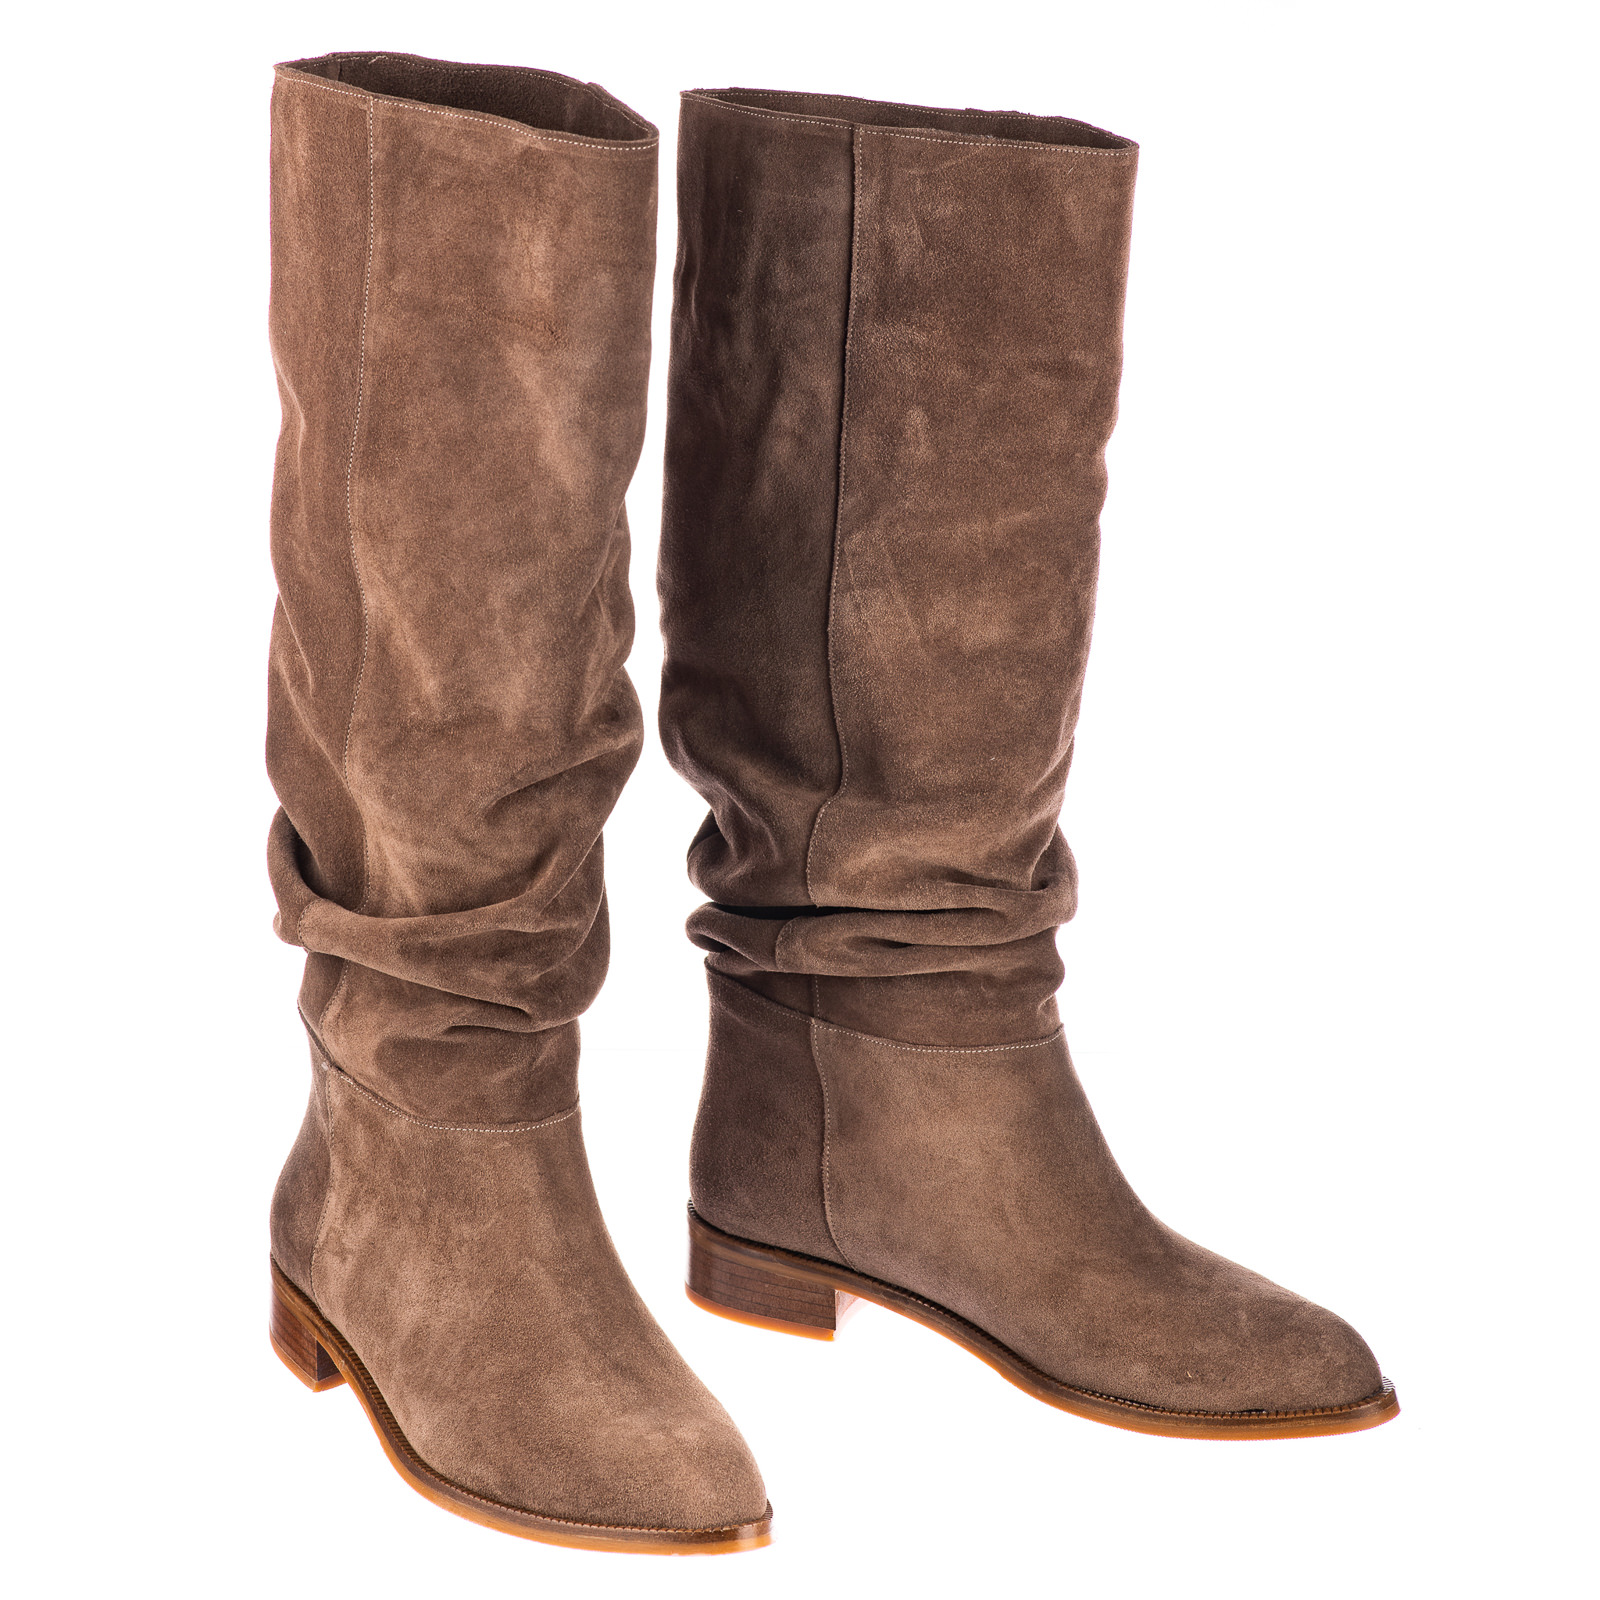 Leather boots B736 - BEIGE